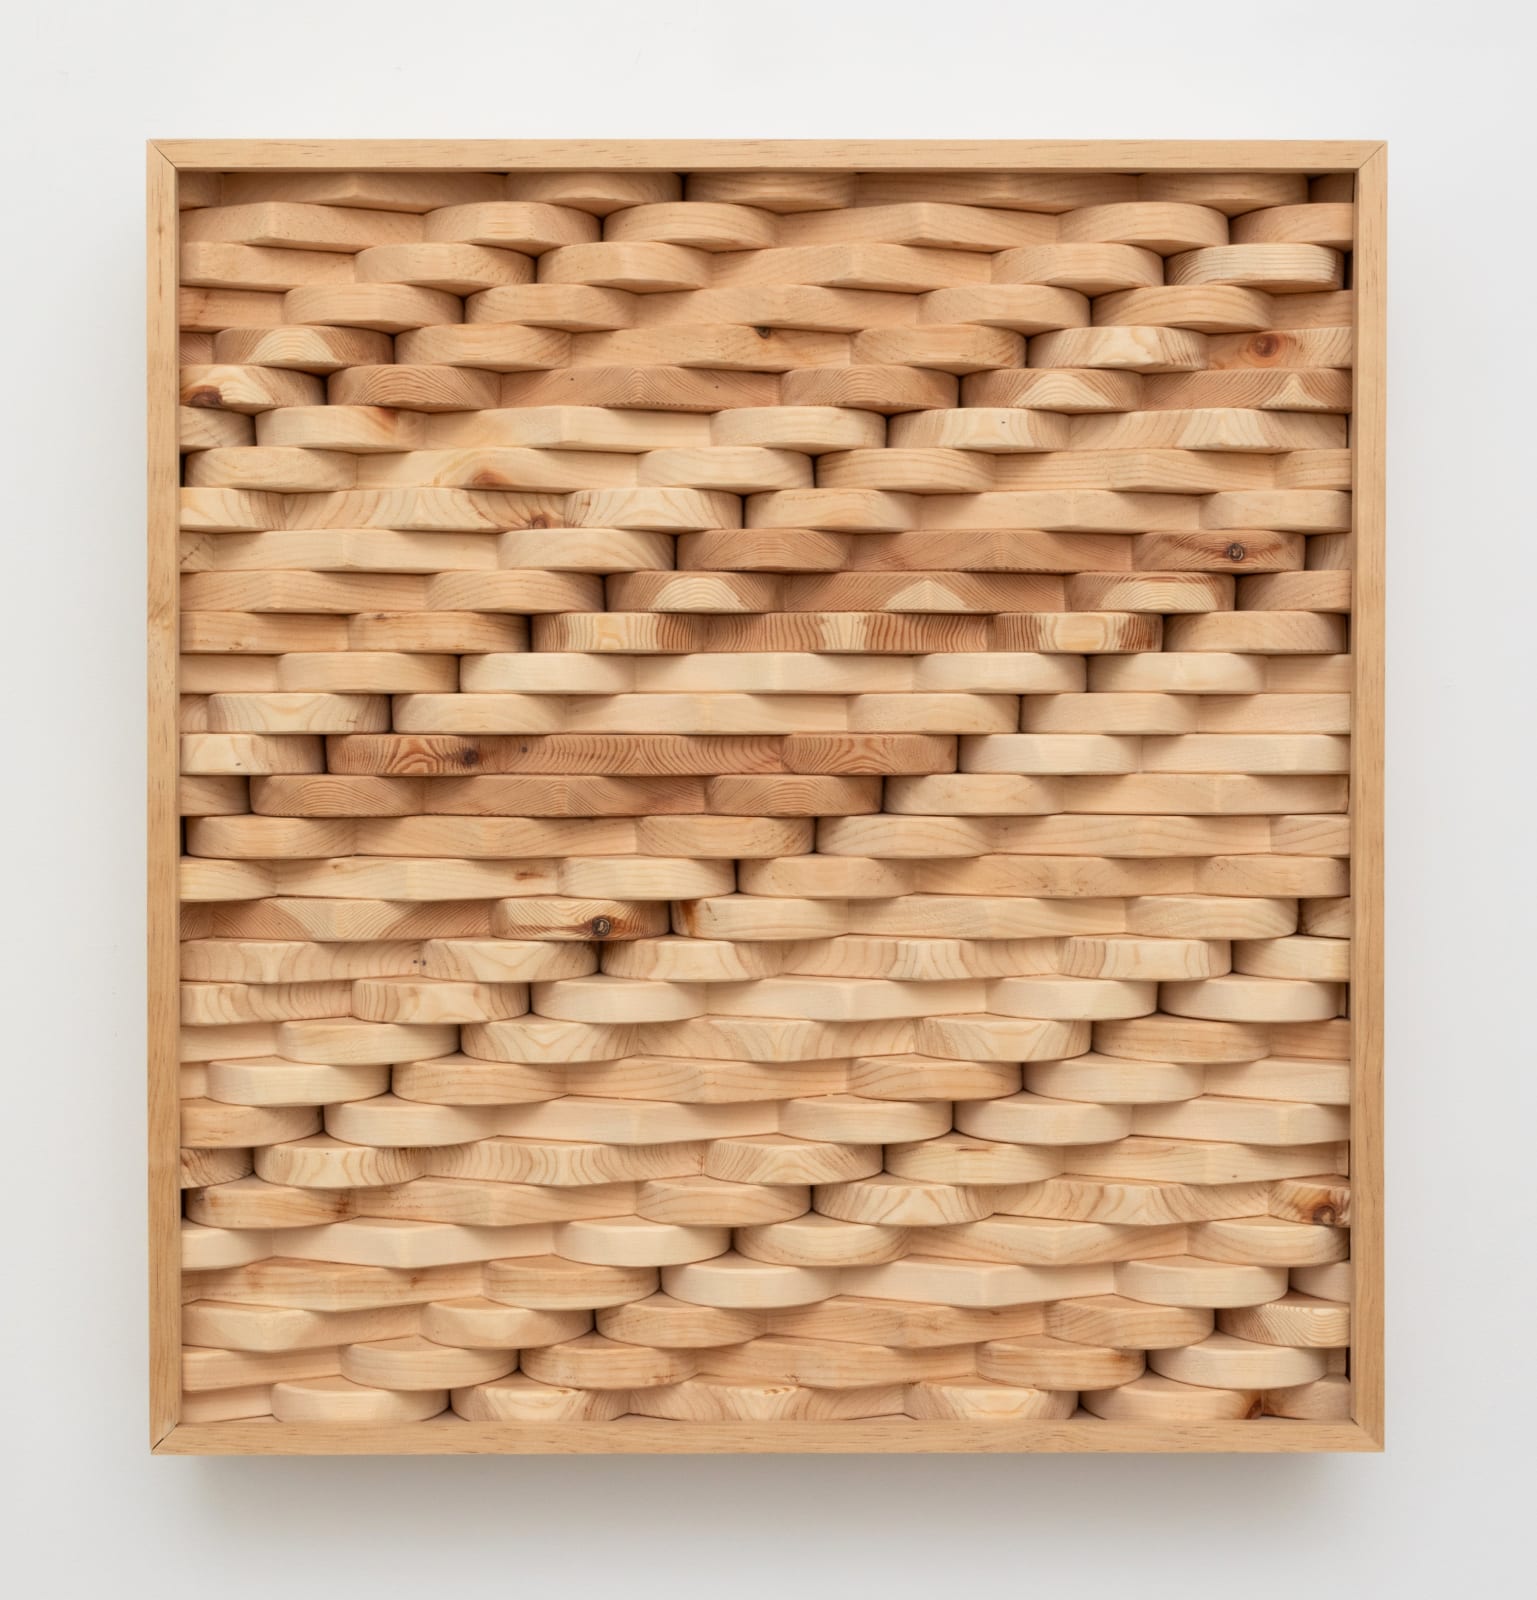 Wall-mounted sculpture consisting of carved wooden pieces aggregated together to form an interlocking patterned rectangular panel.